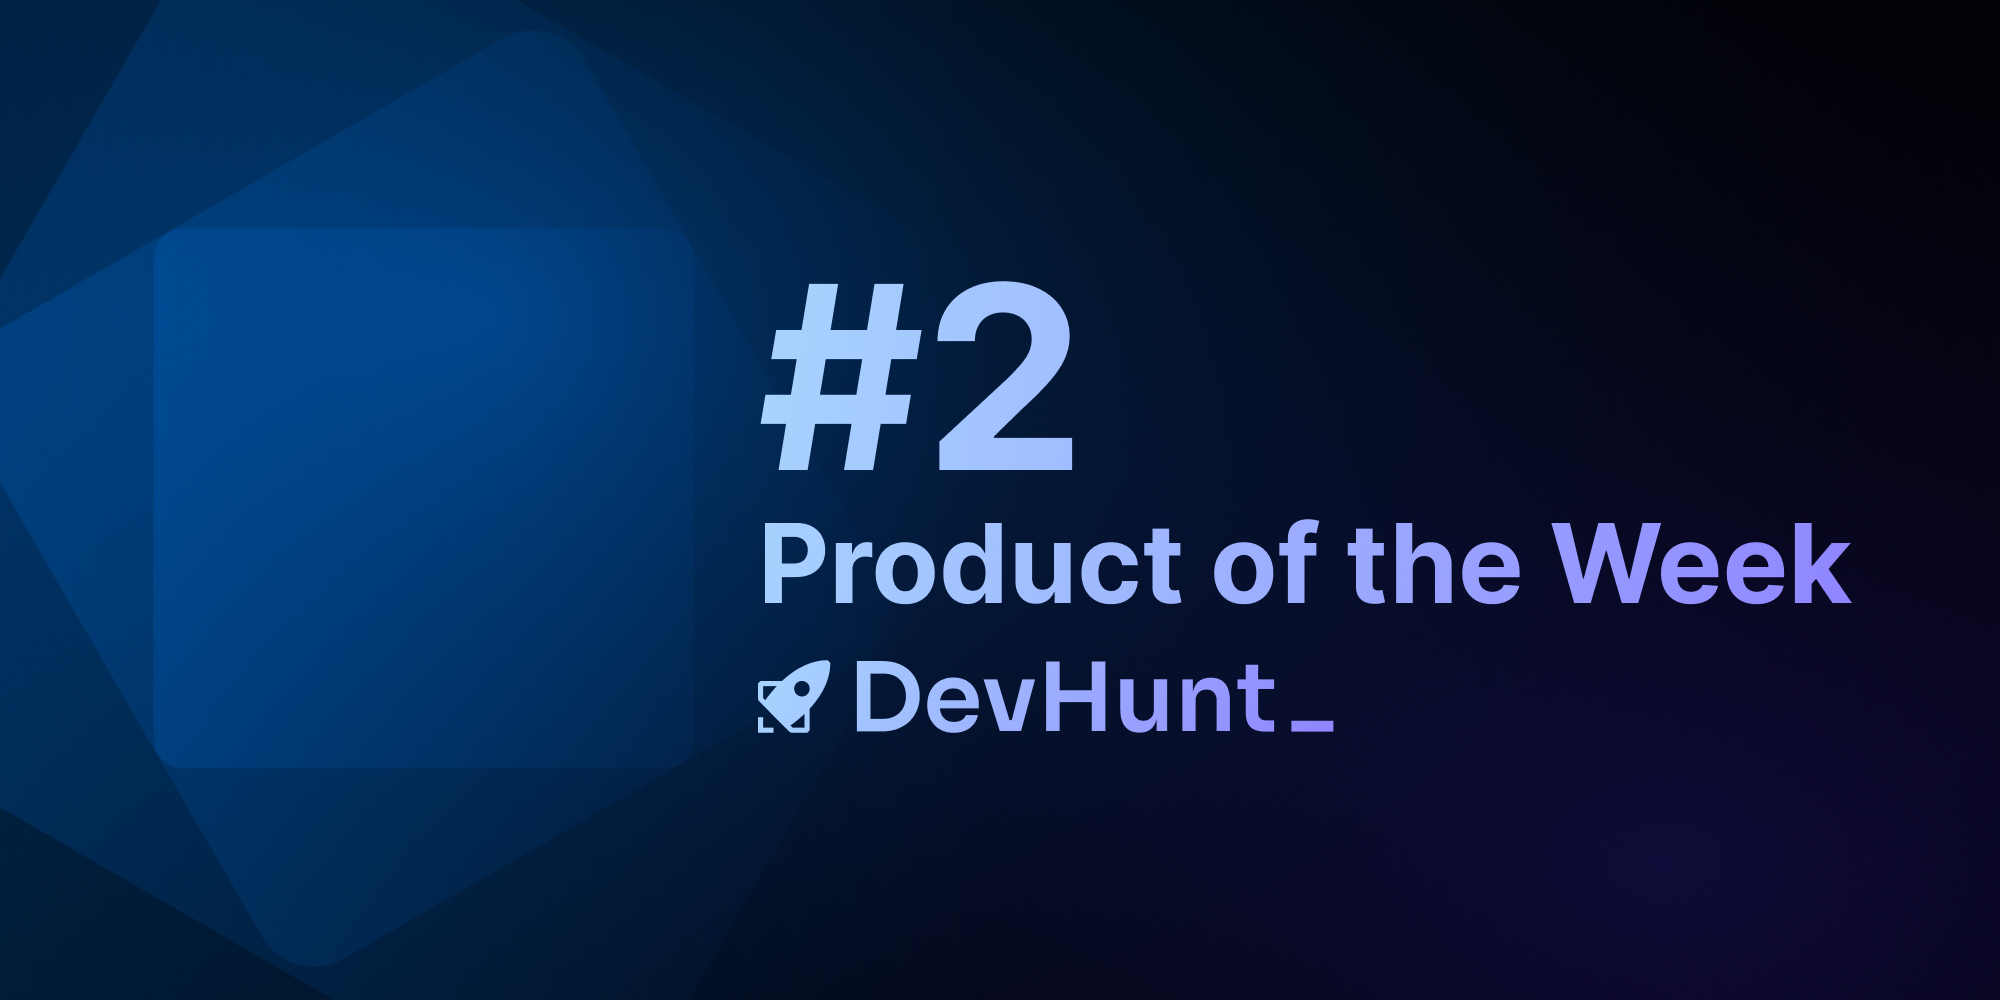 2nd Place on DevHunt's Product of the Week